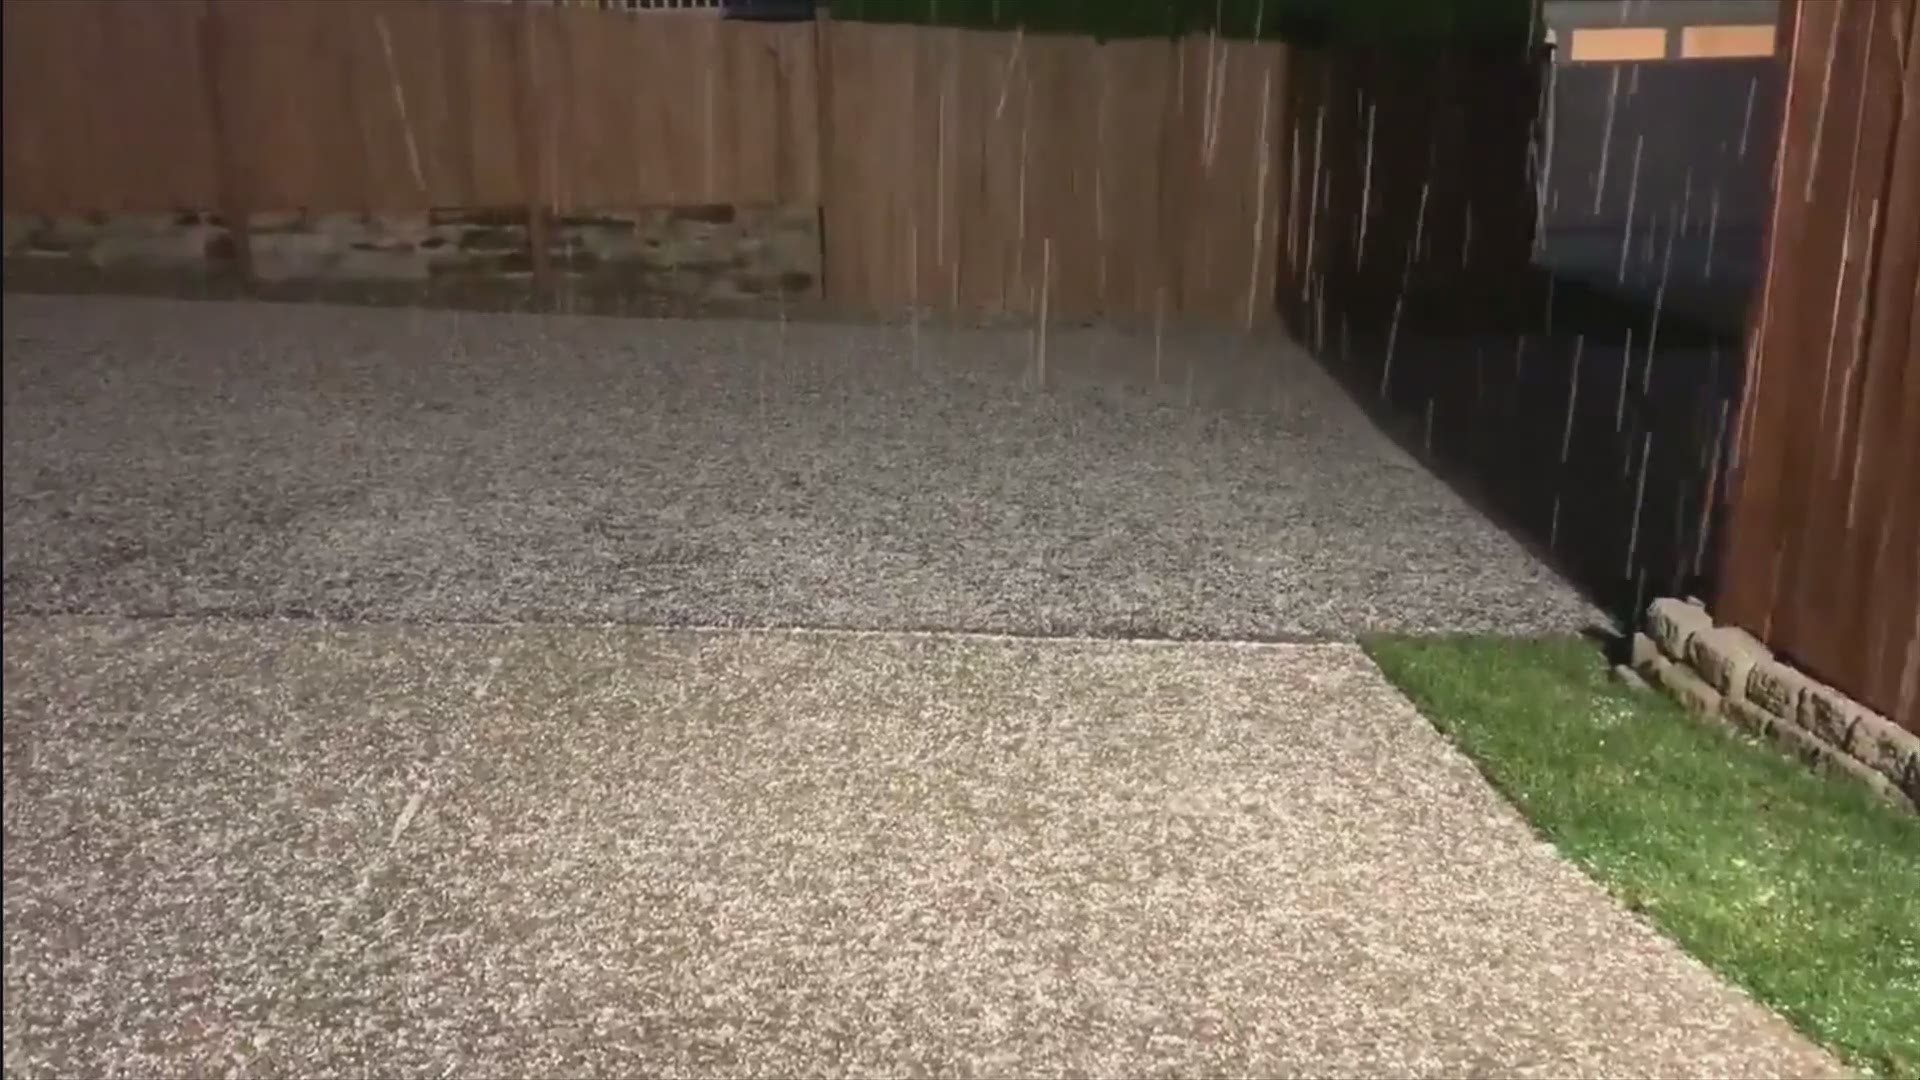 Residents reported hail in the Puyallup area Monday evening.